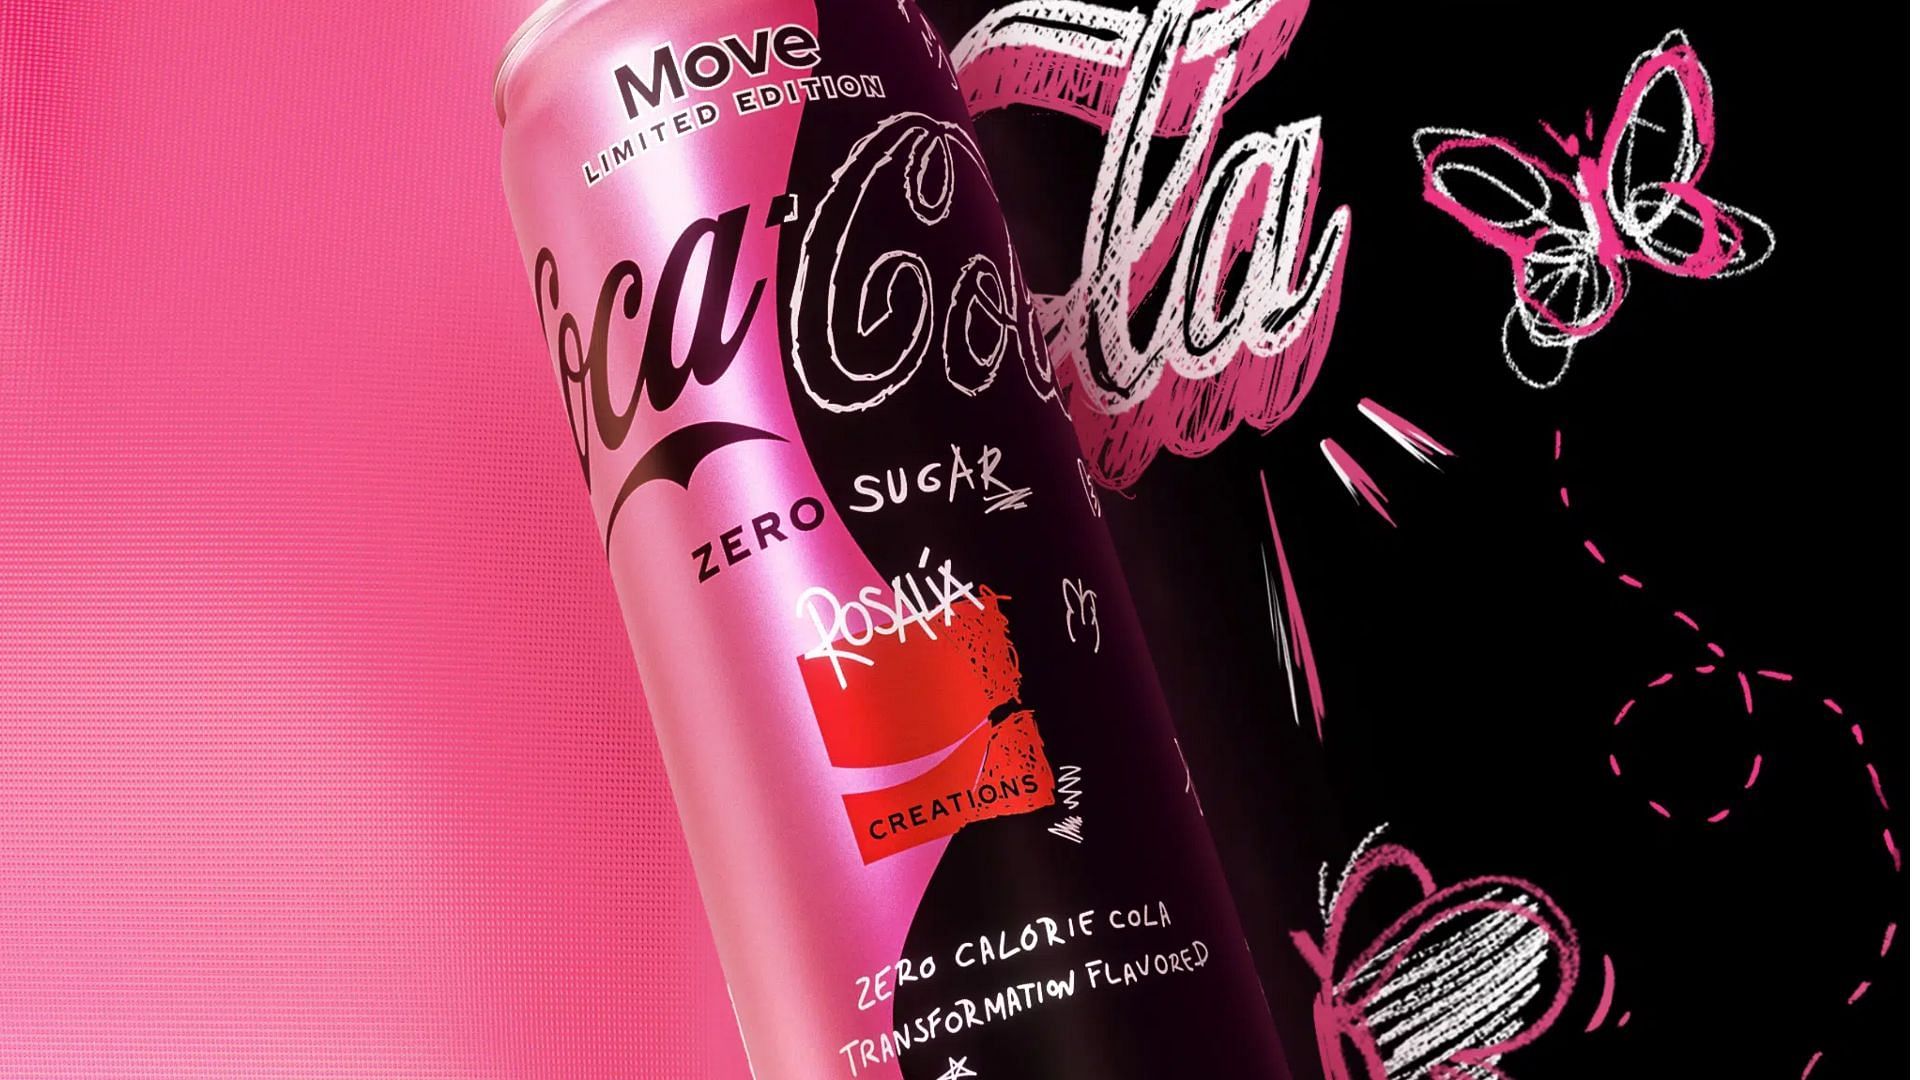 the new &quot;transformation-flavored&quot; soda will be available at all major retail and grocery stores across the United States and Canada (Image via Coca-Cola)